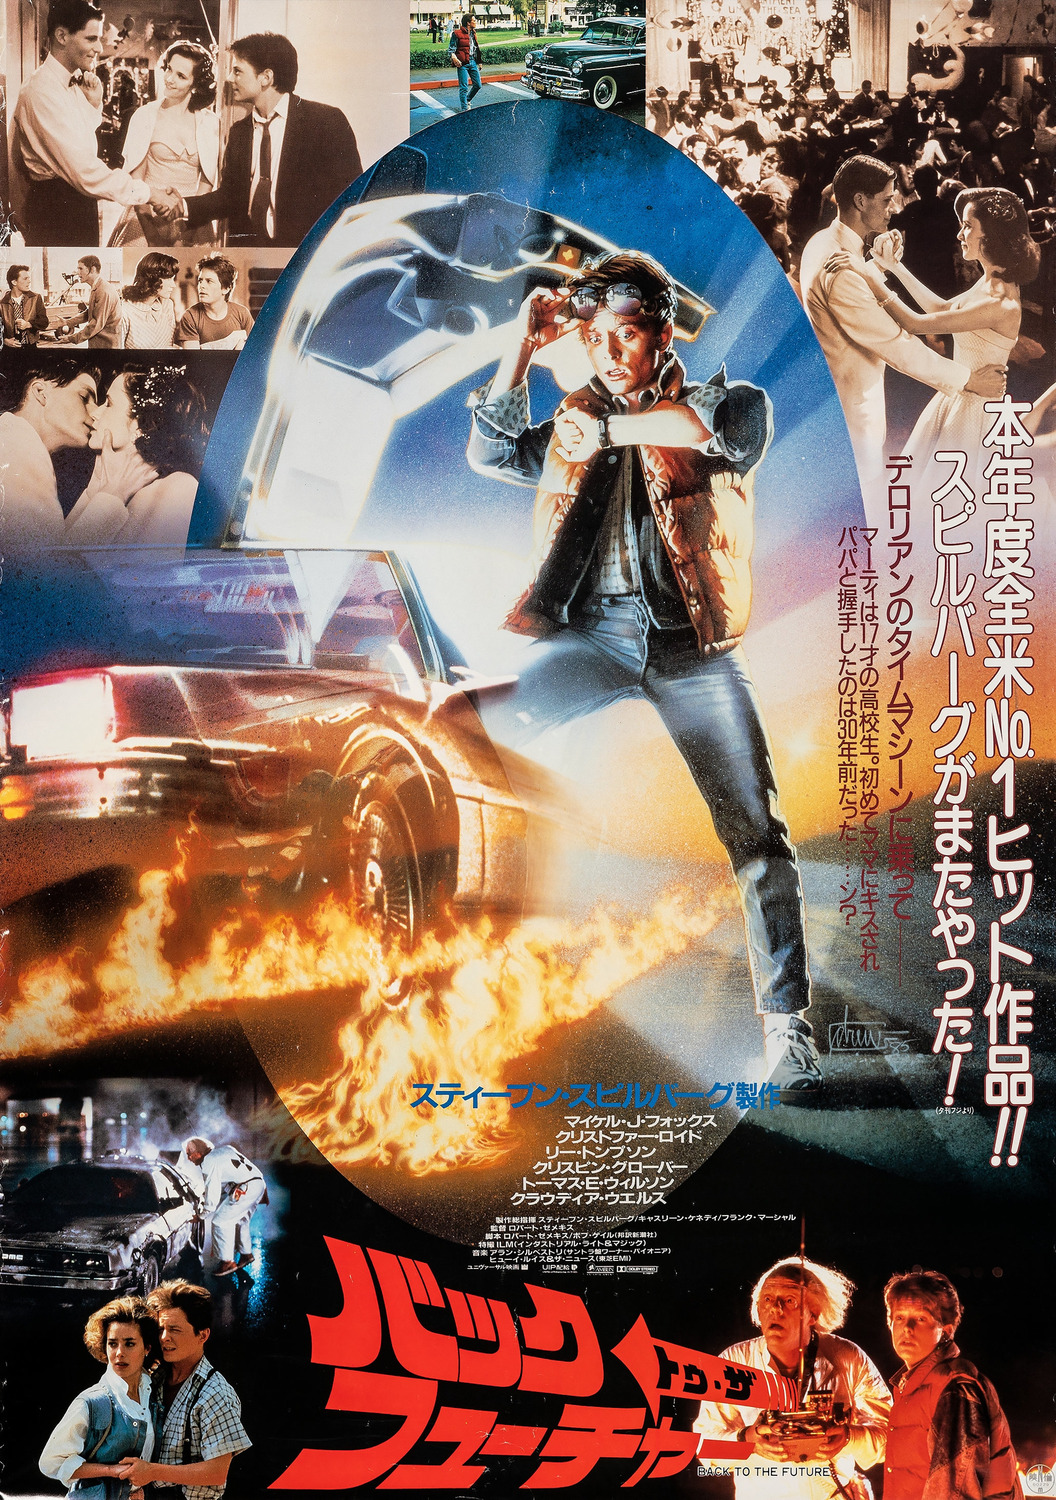 Extra Large Movie Poster Image for Back to the Future (#5 of 5)